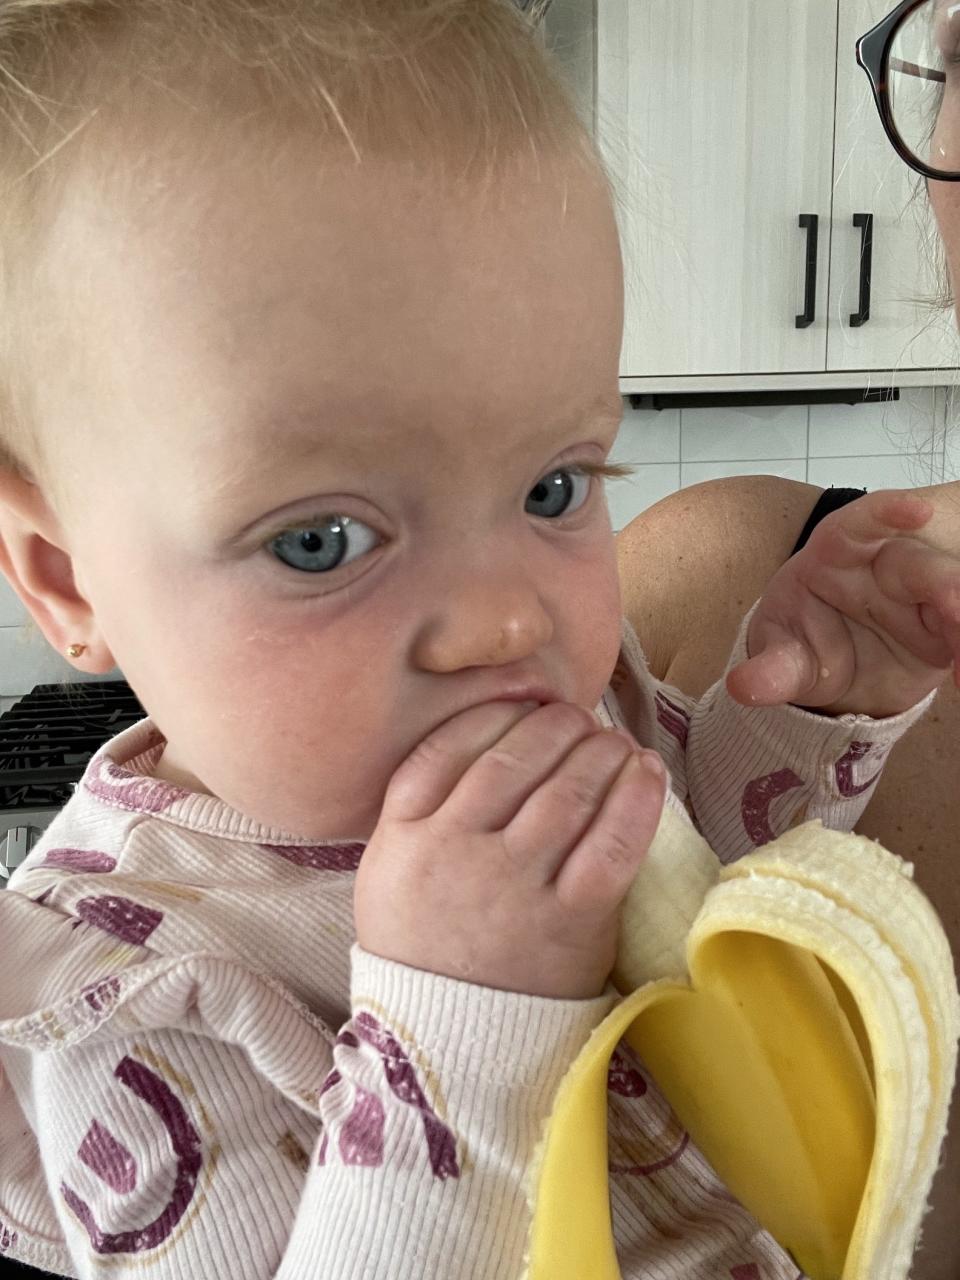 The author's kid eating a banana